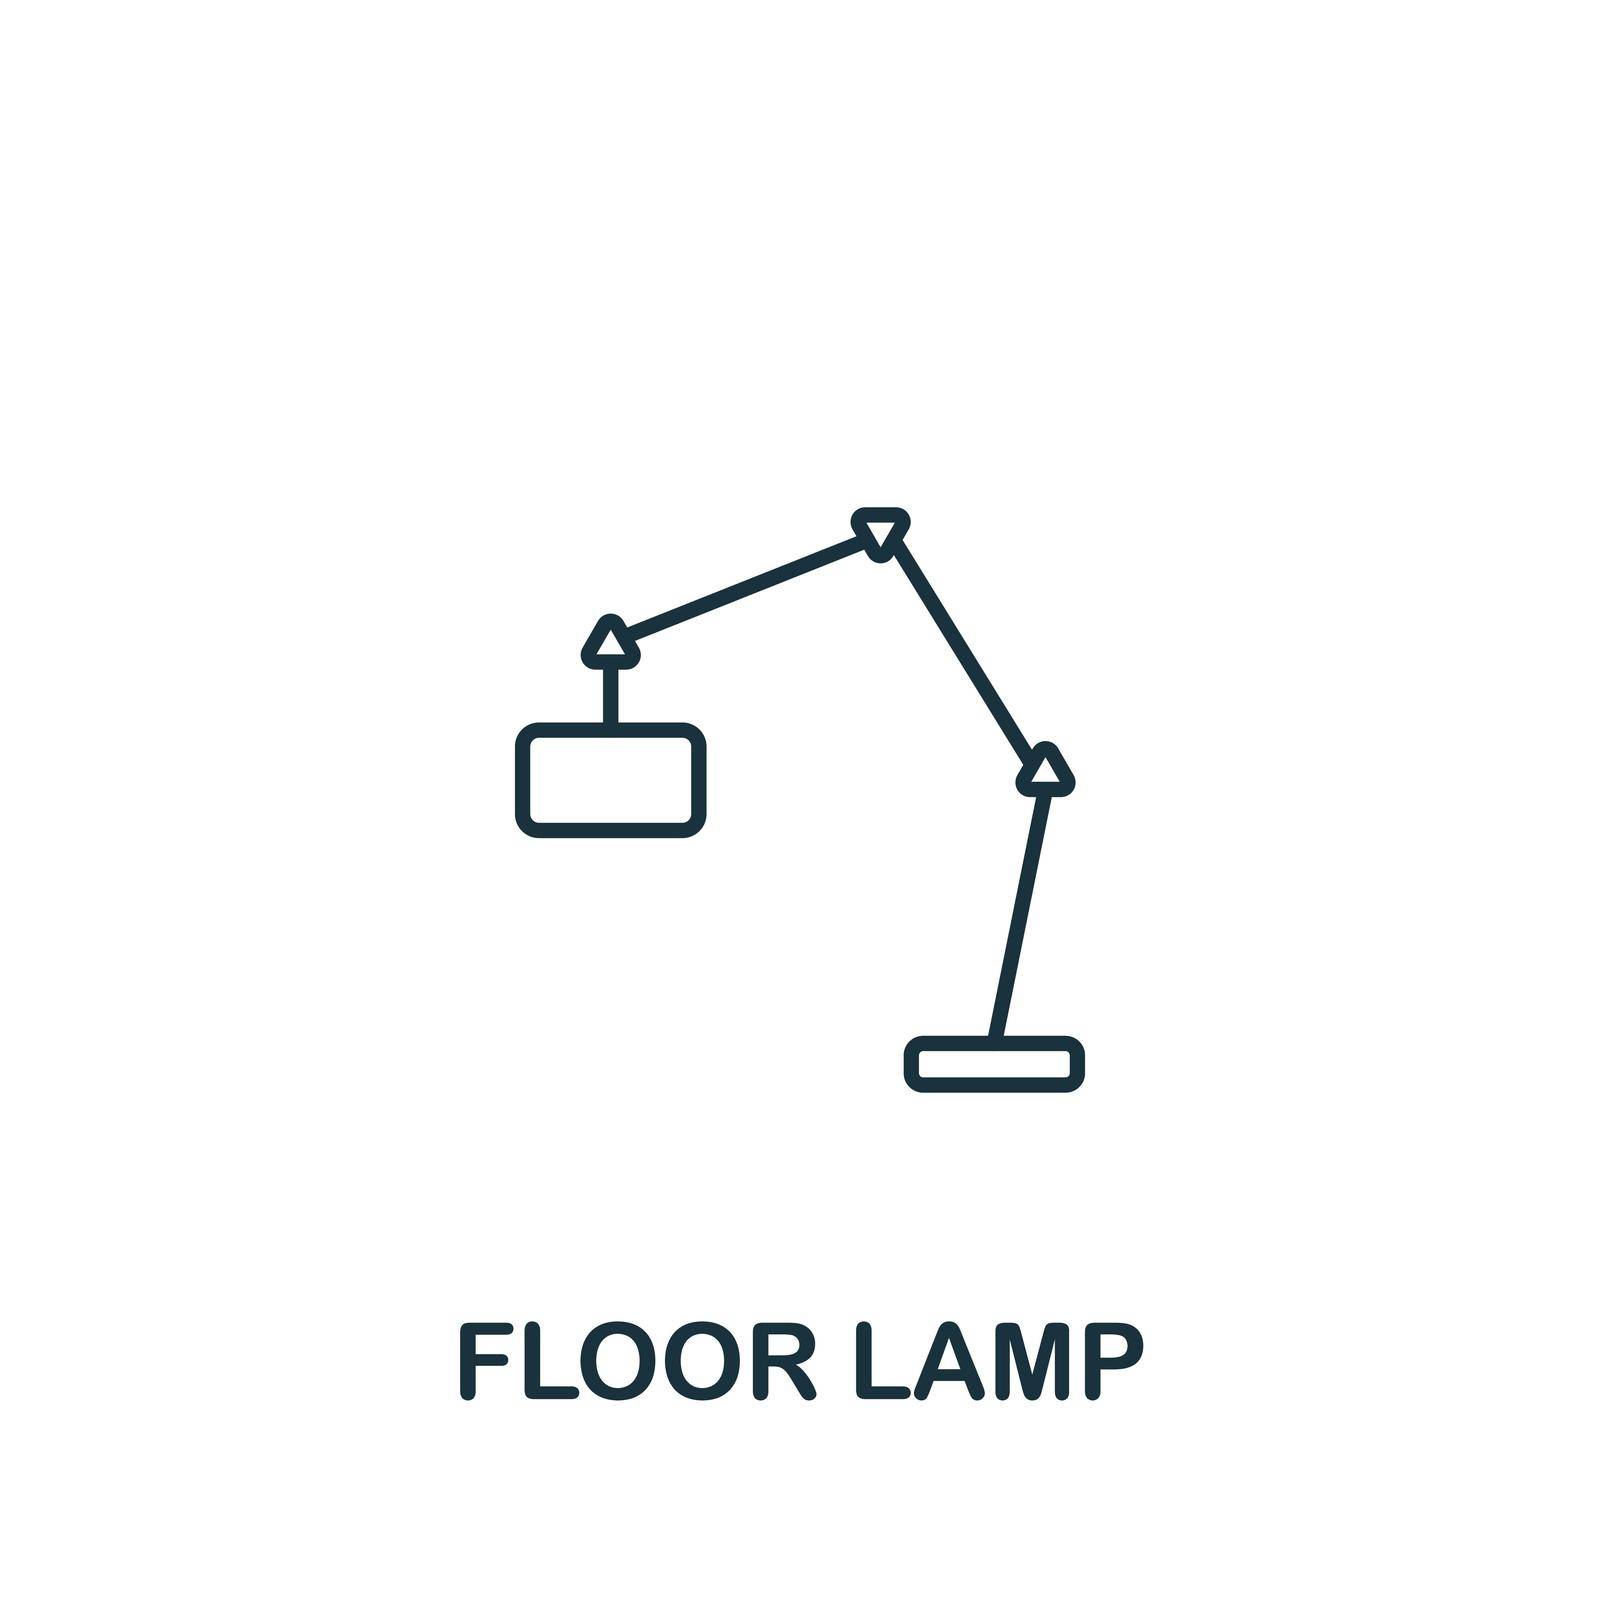 Floor Lamp icon. Line simple Interior Furniture icon for templates, web design and infographics by simakovavector